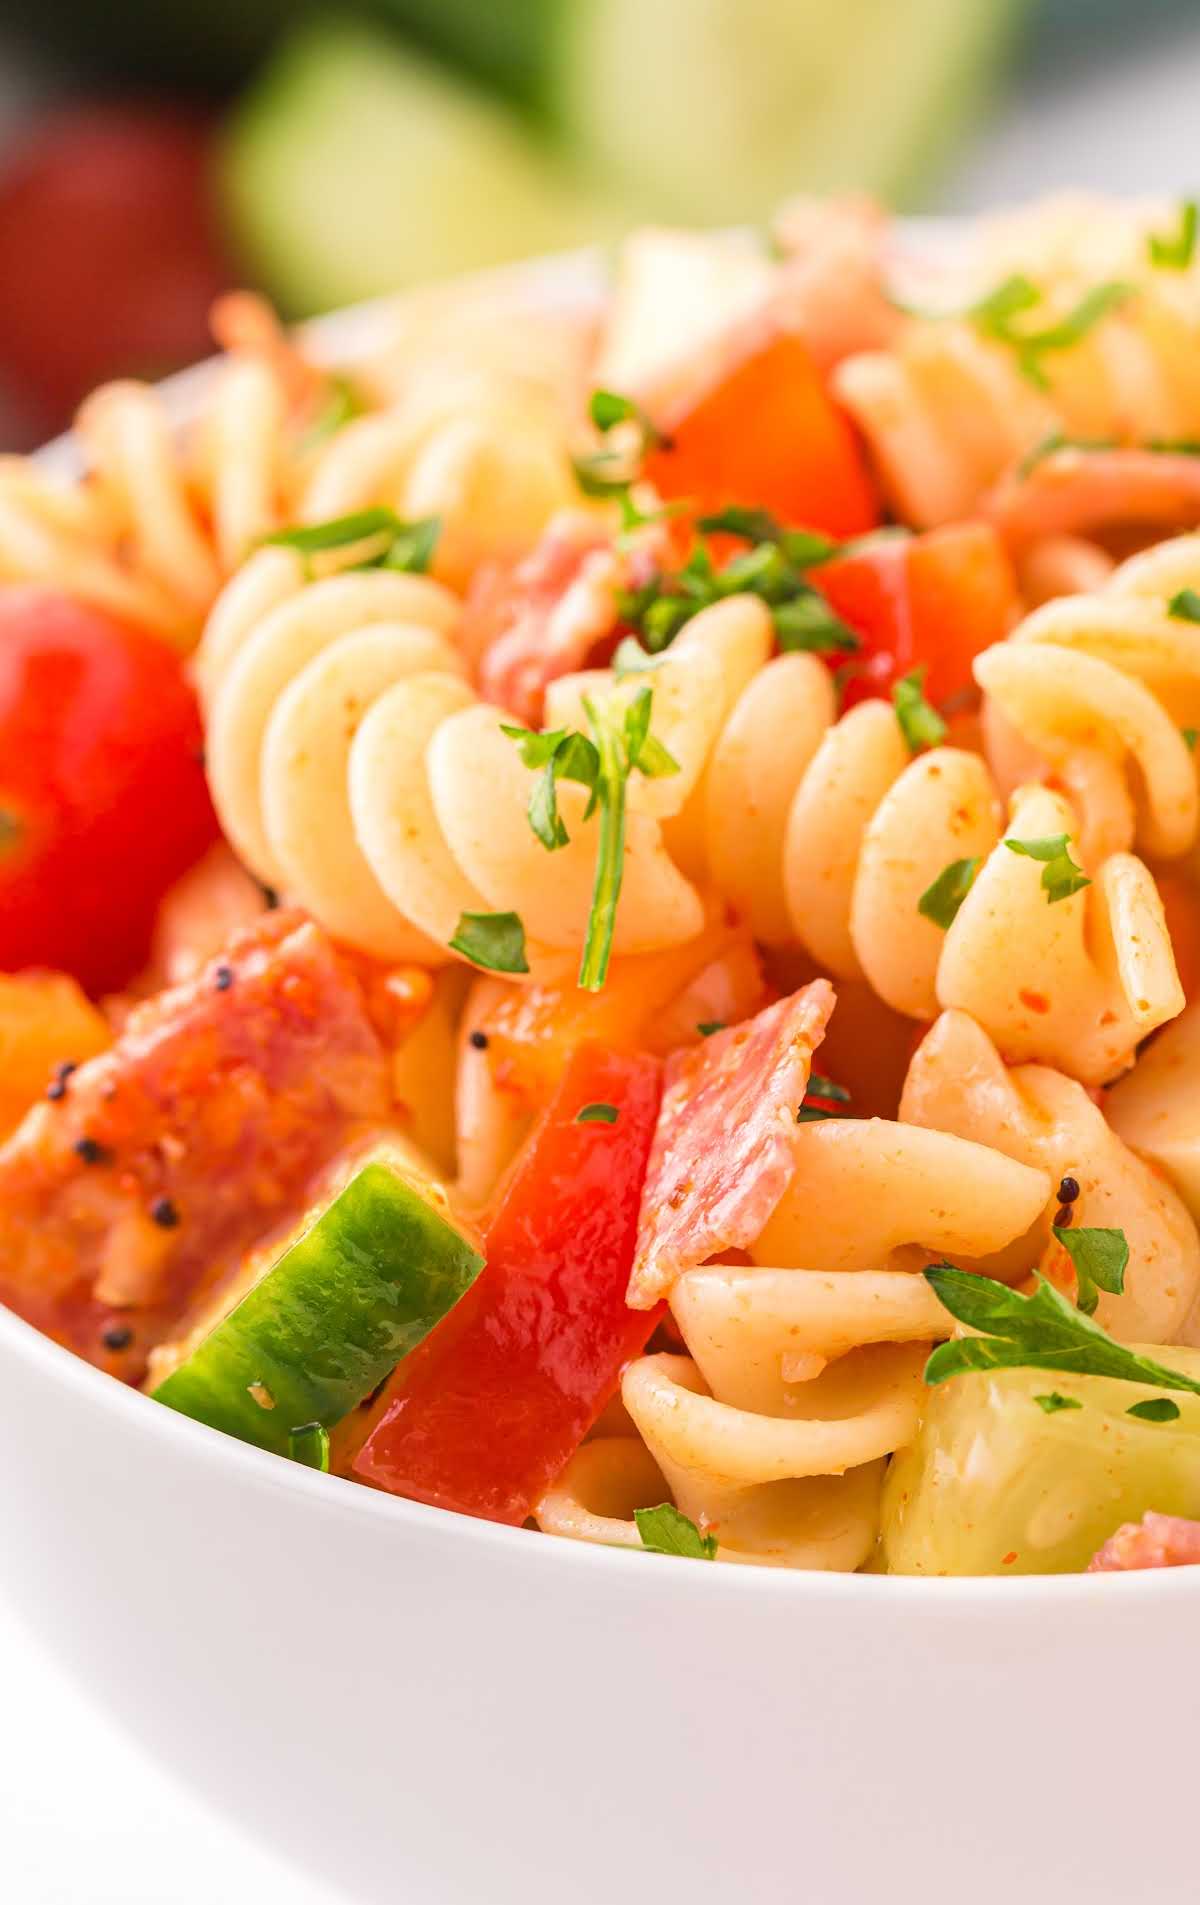 a bowl of Pasta Salad garnished with parsley